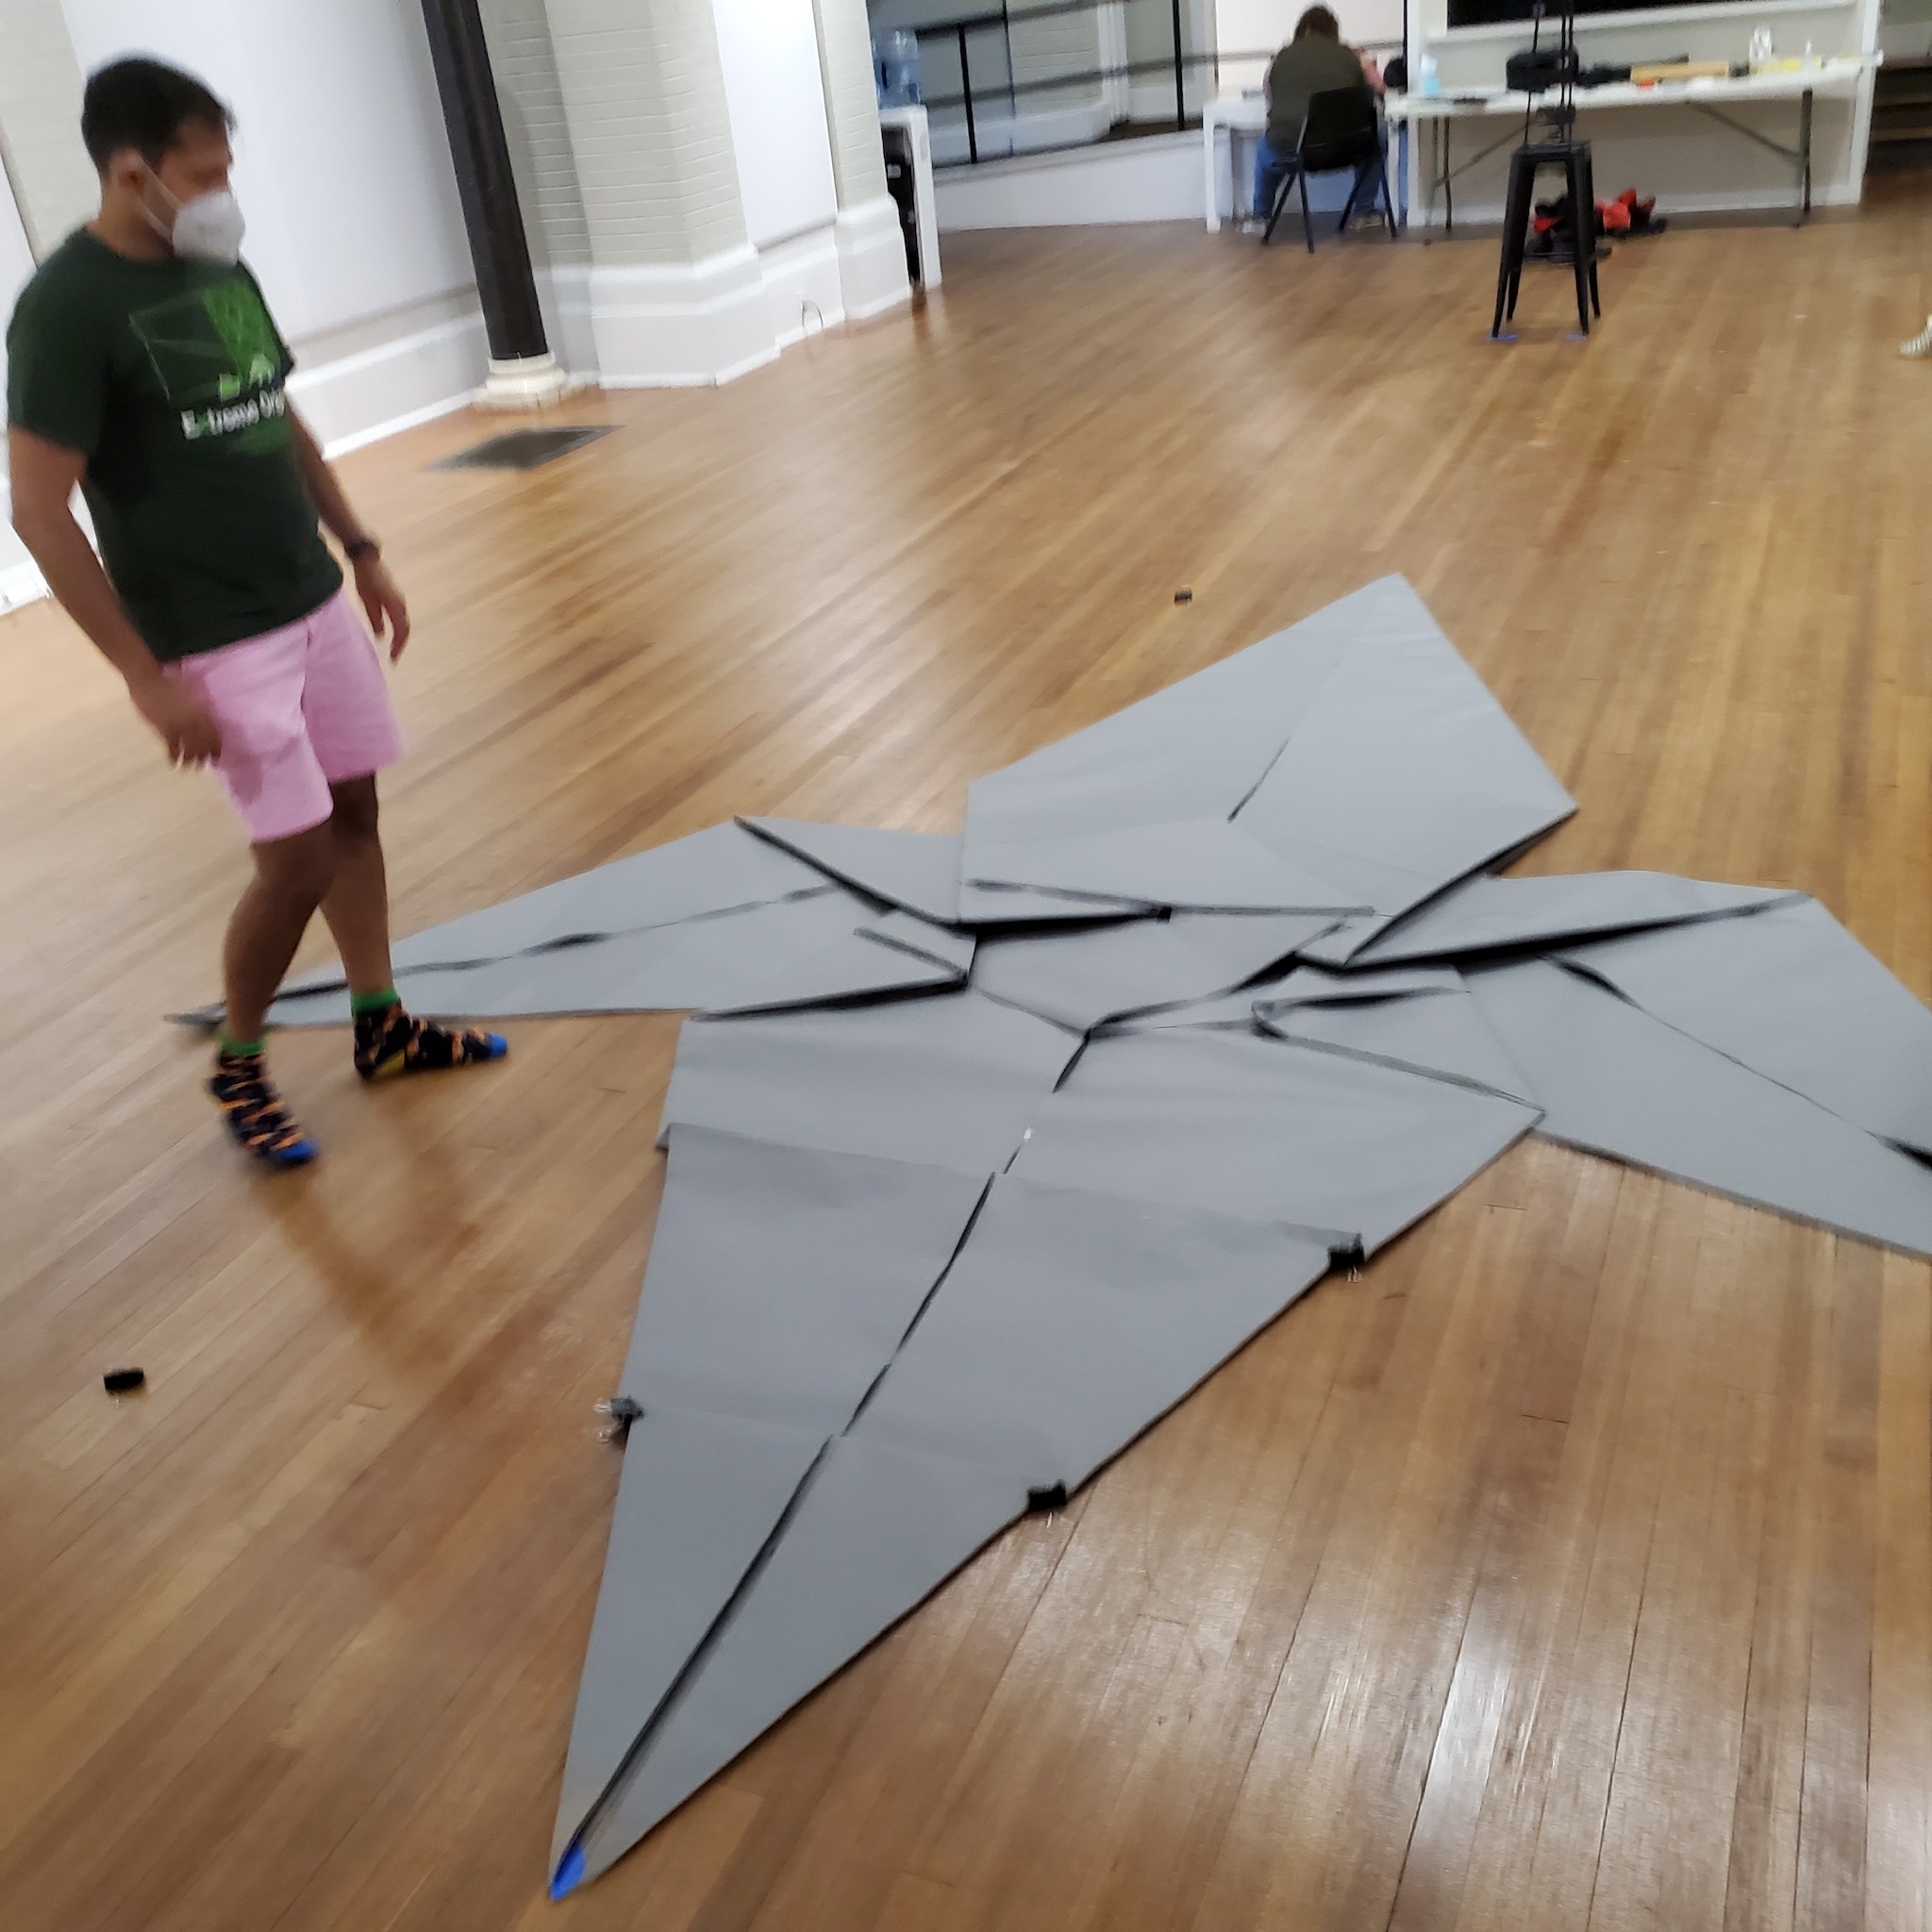 Shrikant Iyer and Paul Frasco recently built the world's largest origami dragon at the Southampton Arts Center.